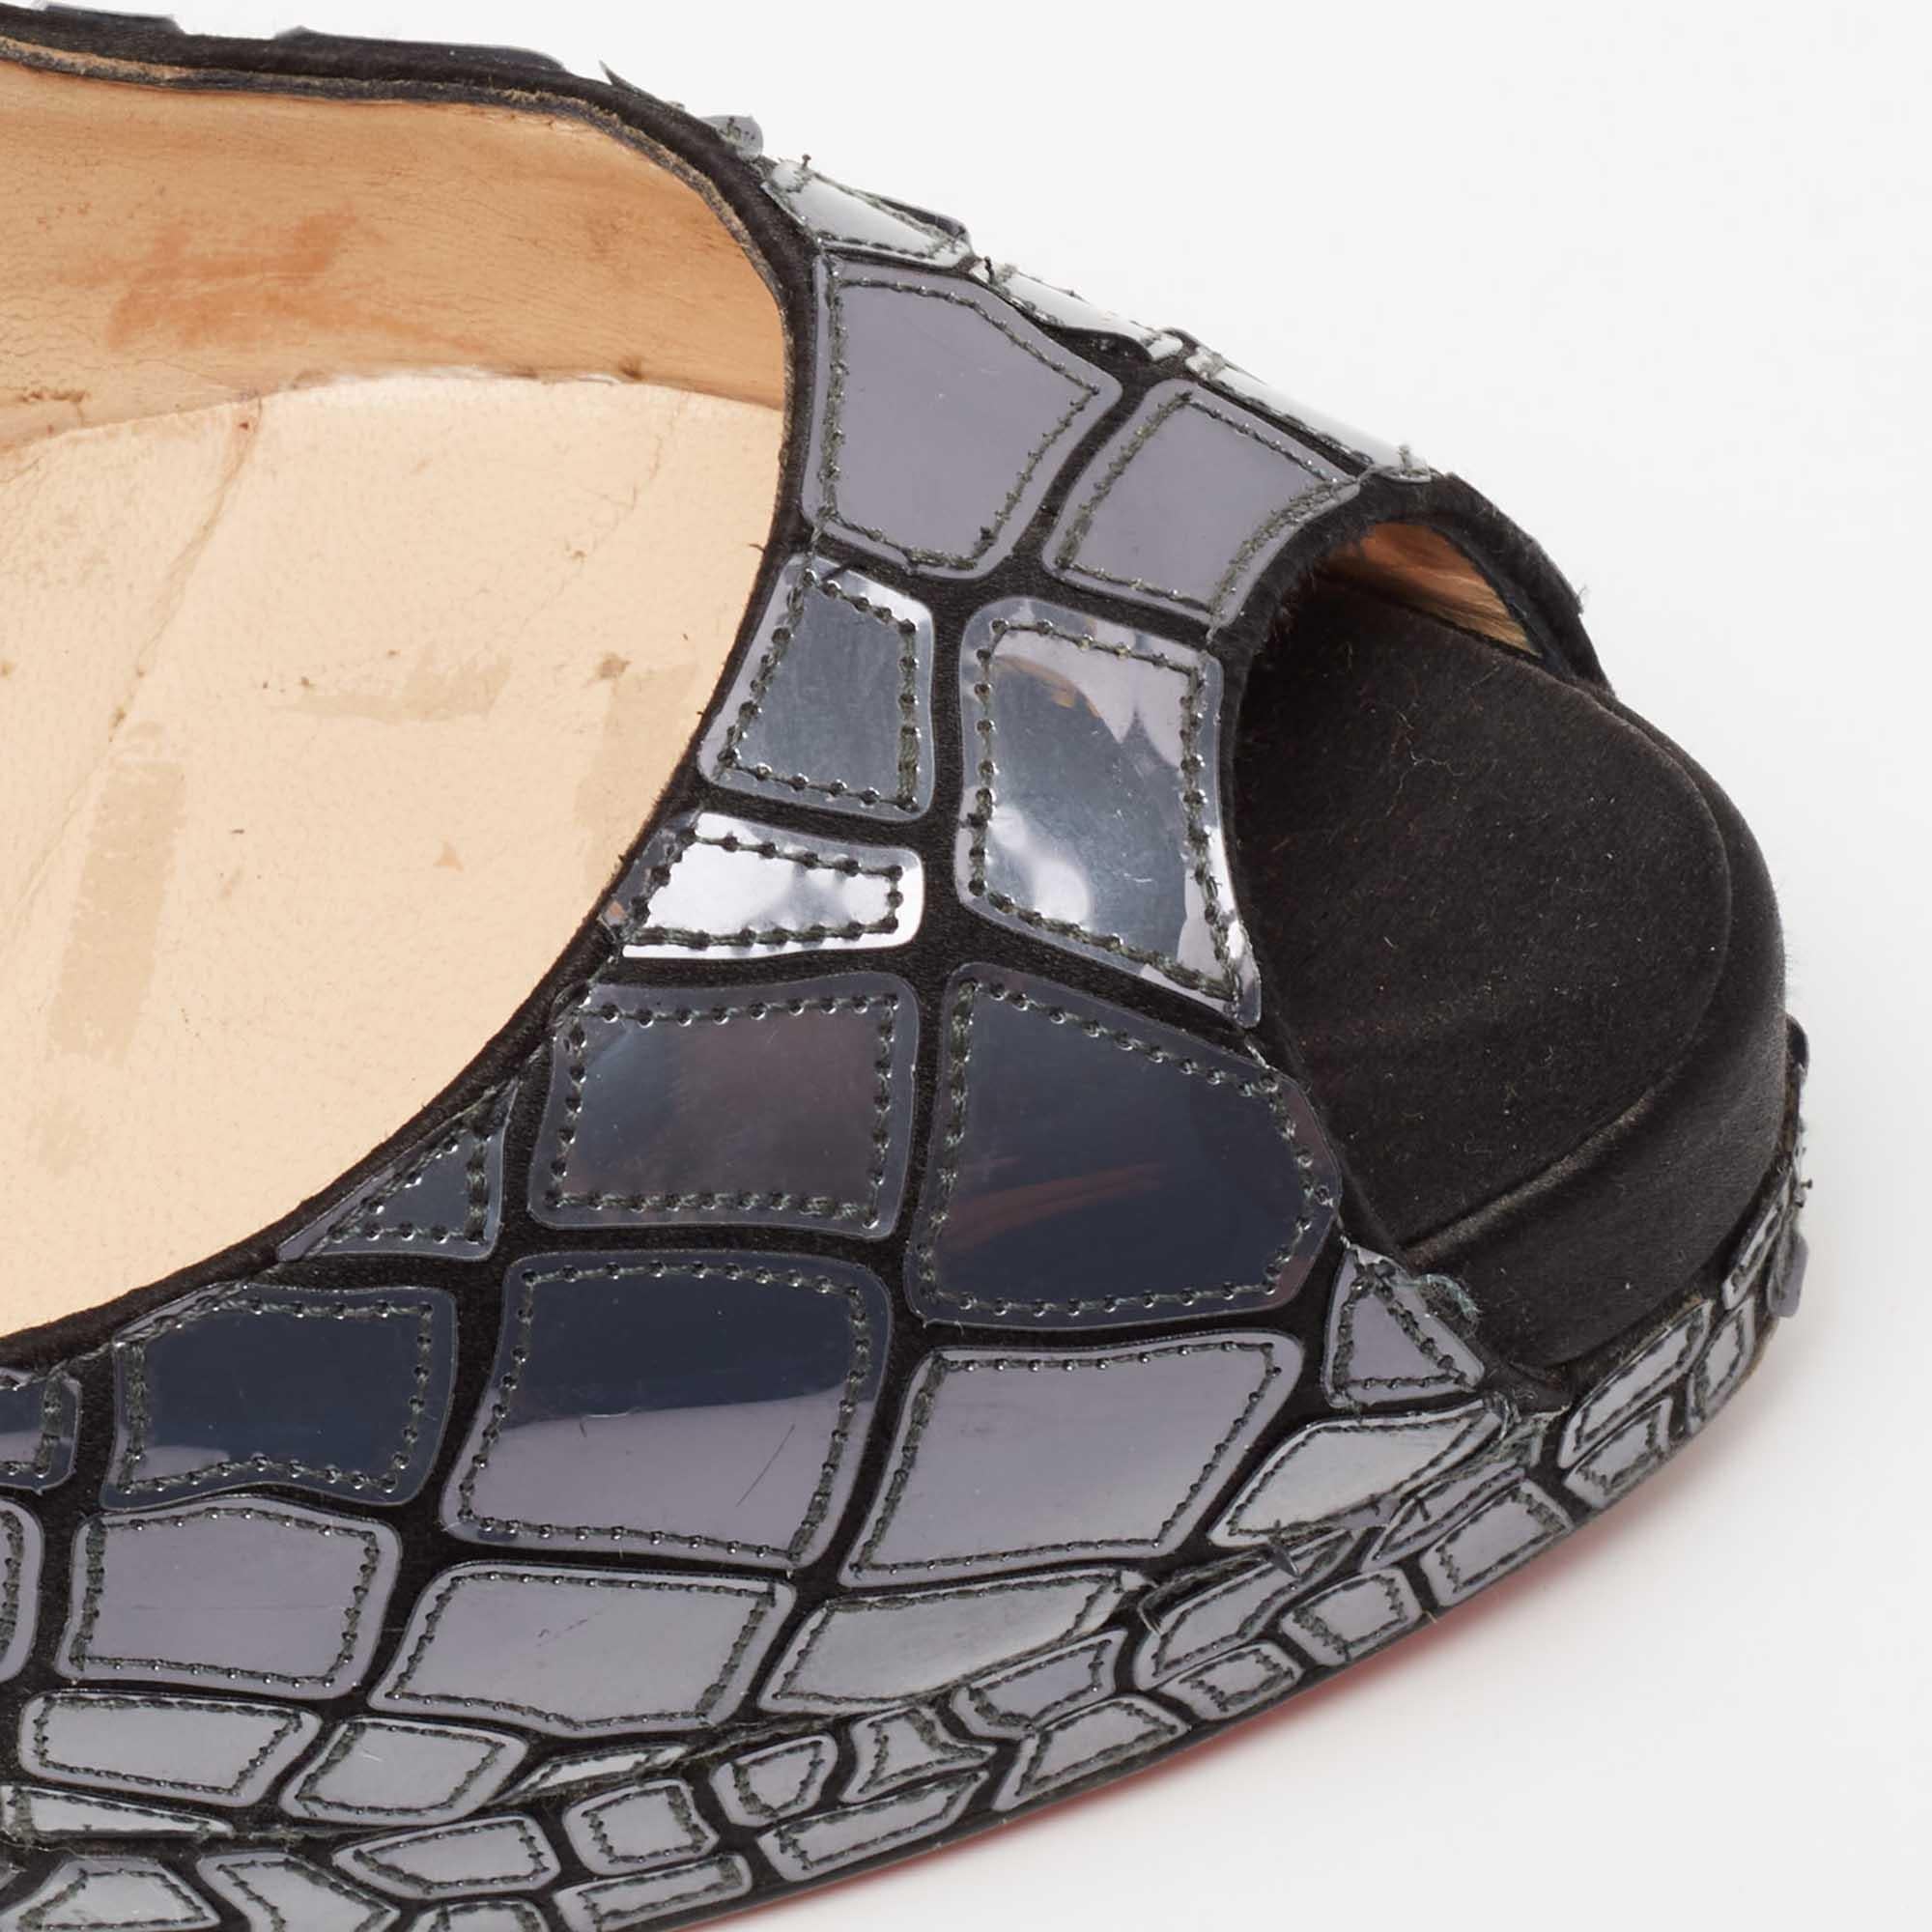 Christian Louboutin Slate Grey/Black Patent Leather and Satin Mosaic Sobek Peep- For Sale 2